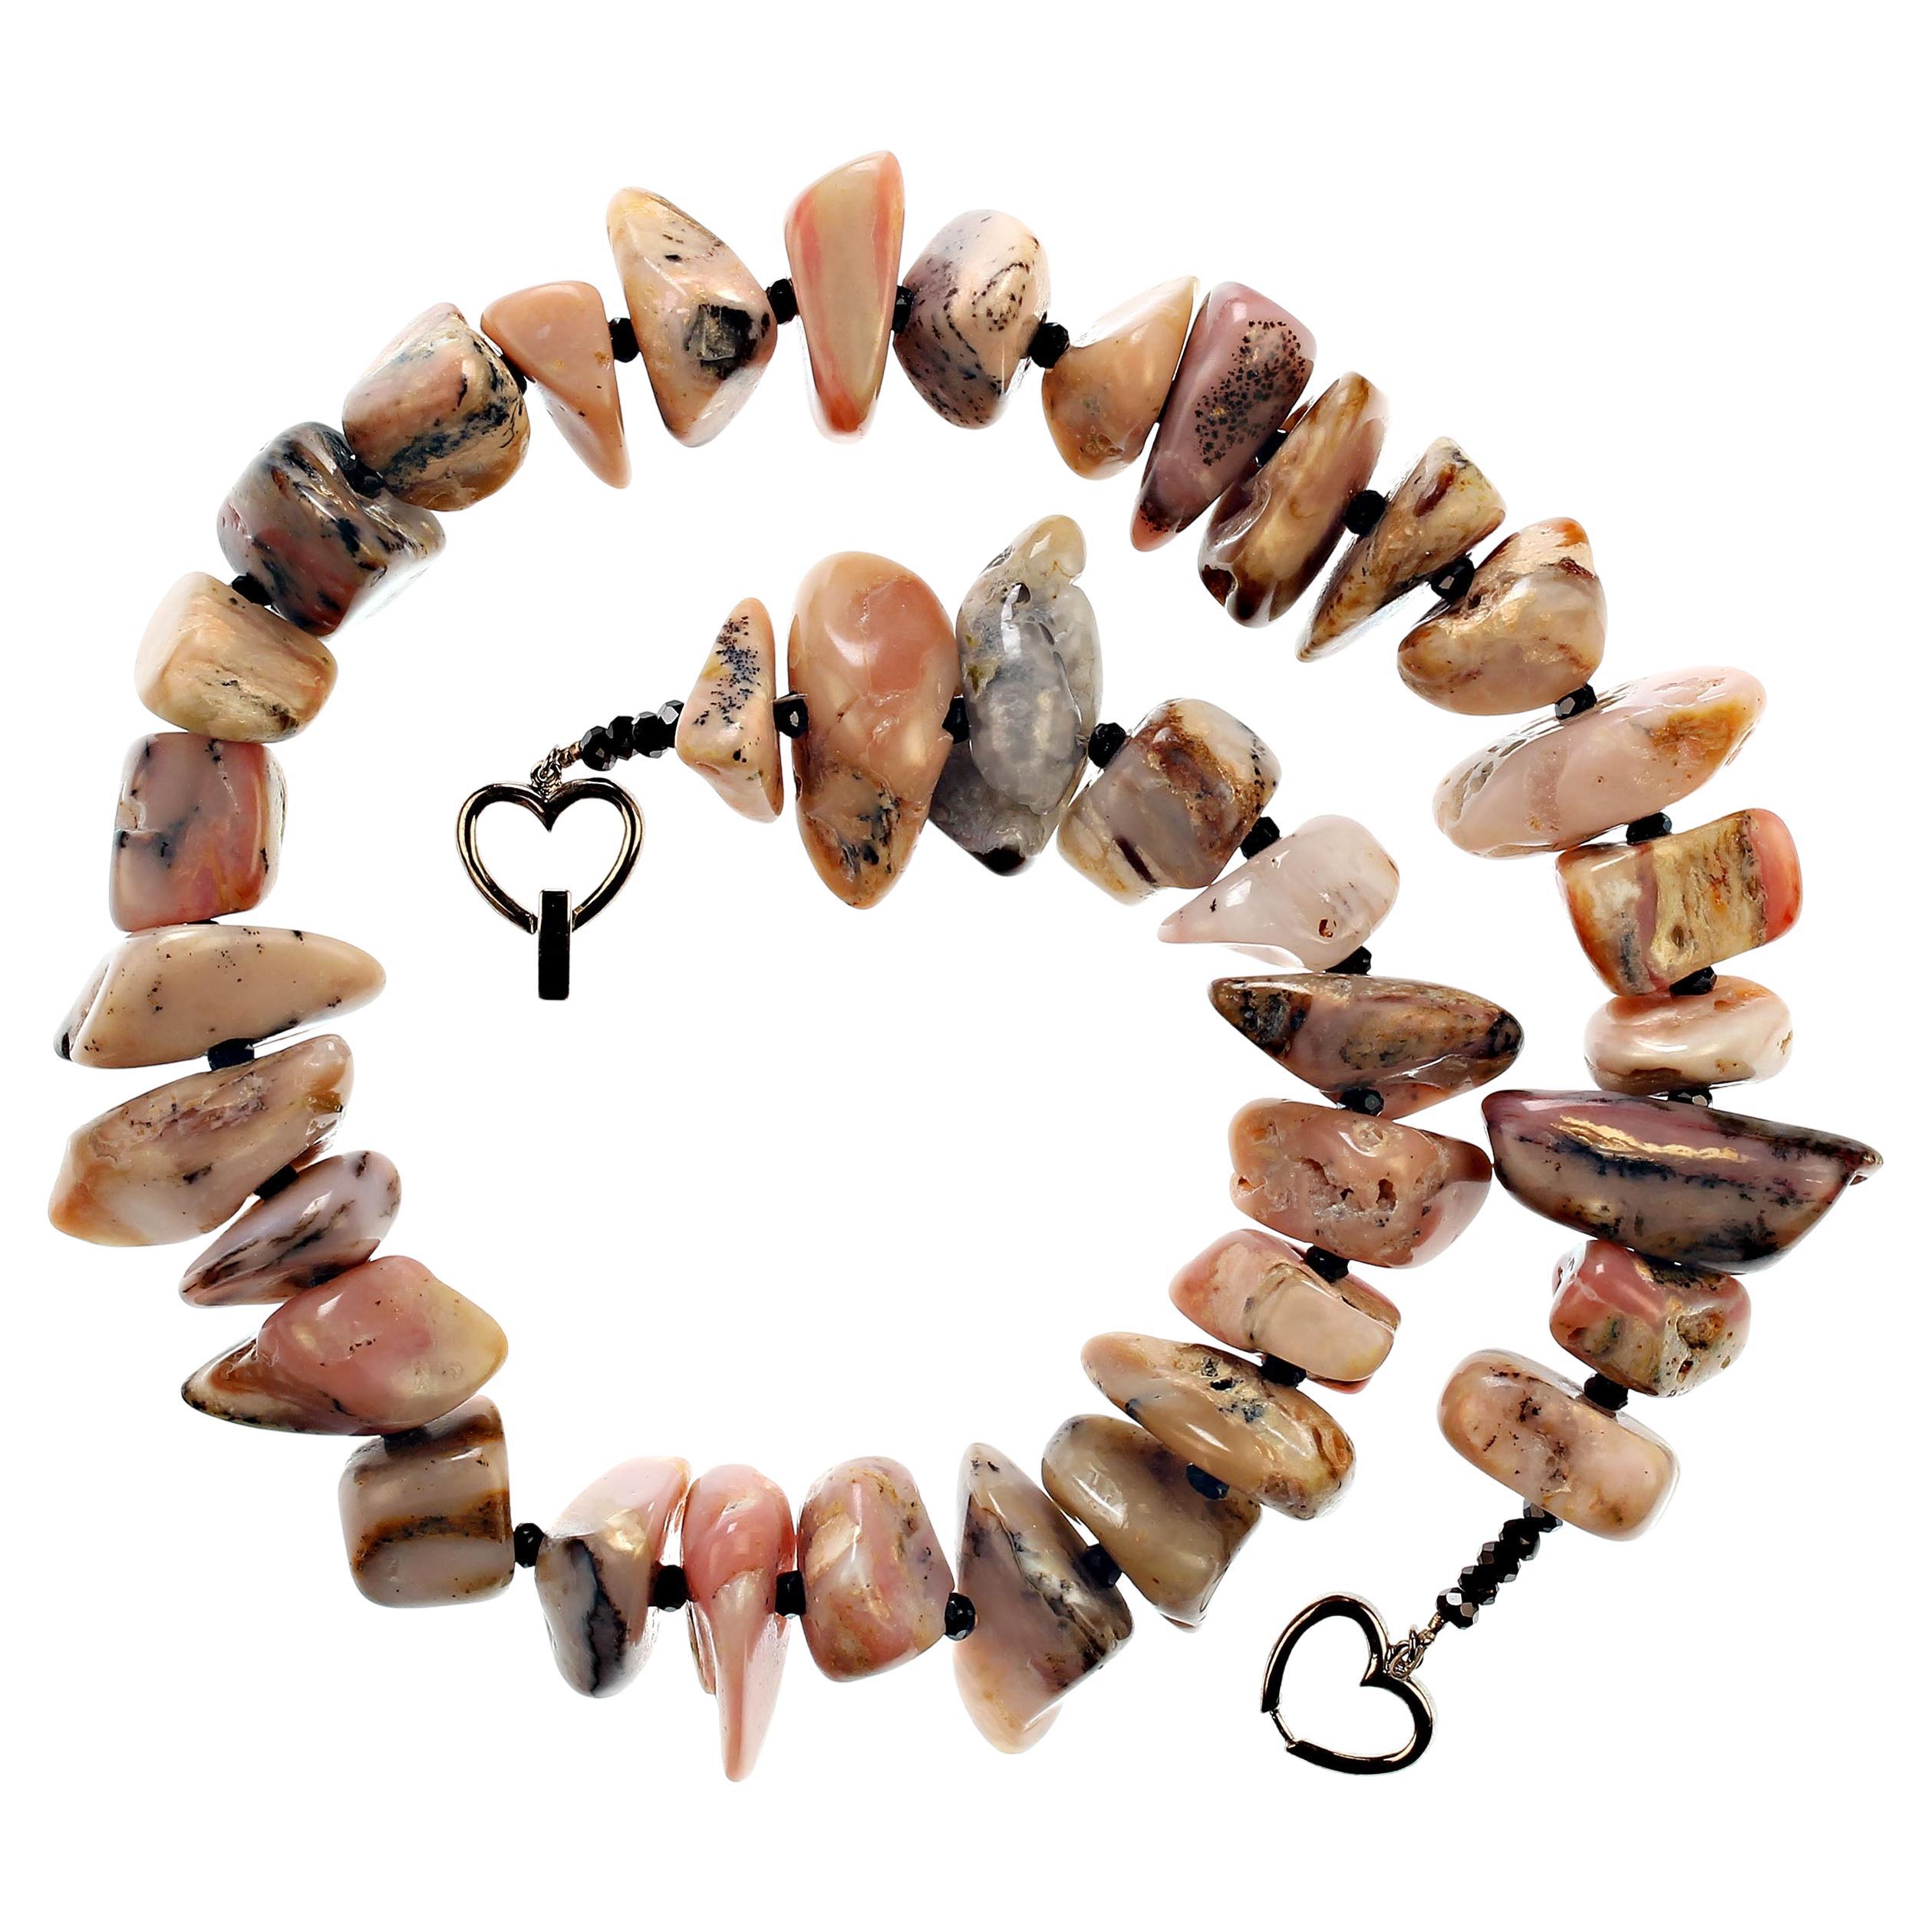 Tumbled and highly polished nuggets of Pink Peruvian Opal Necklace with double heart silver plate clasp. Total length of necklace is 21 inches. No two of these gemstones is alike, they are accented with faceted black Spinel to show off the unique